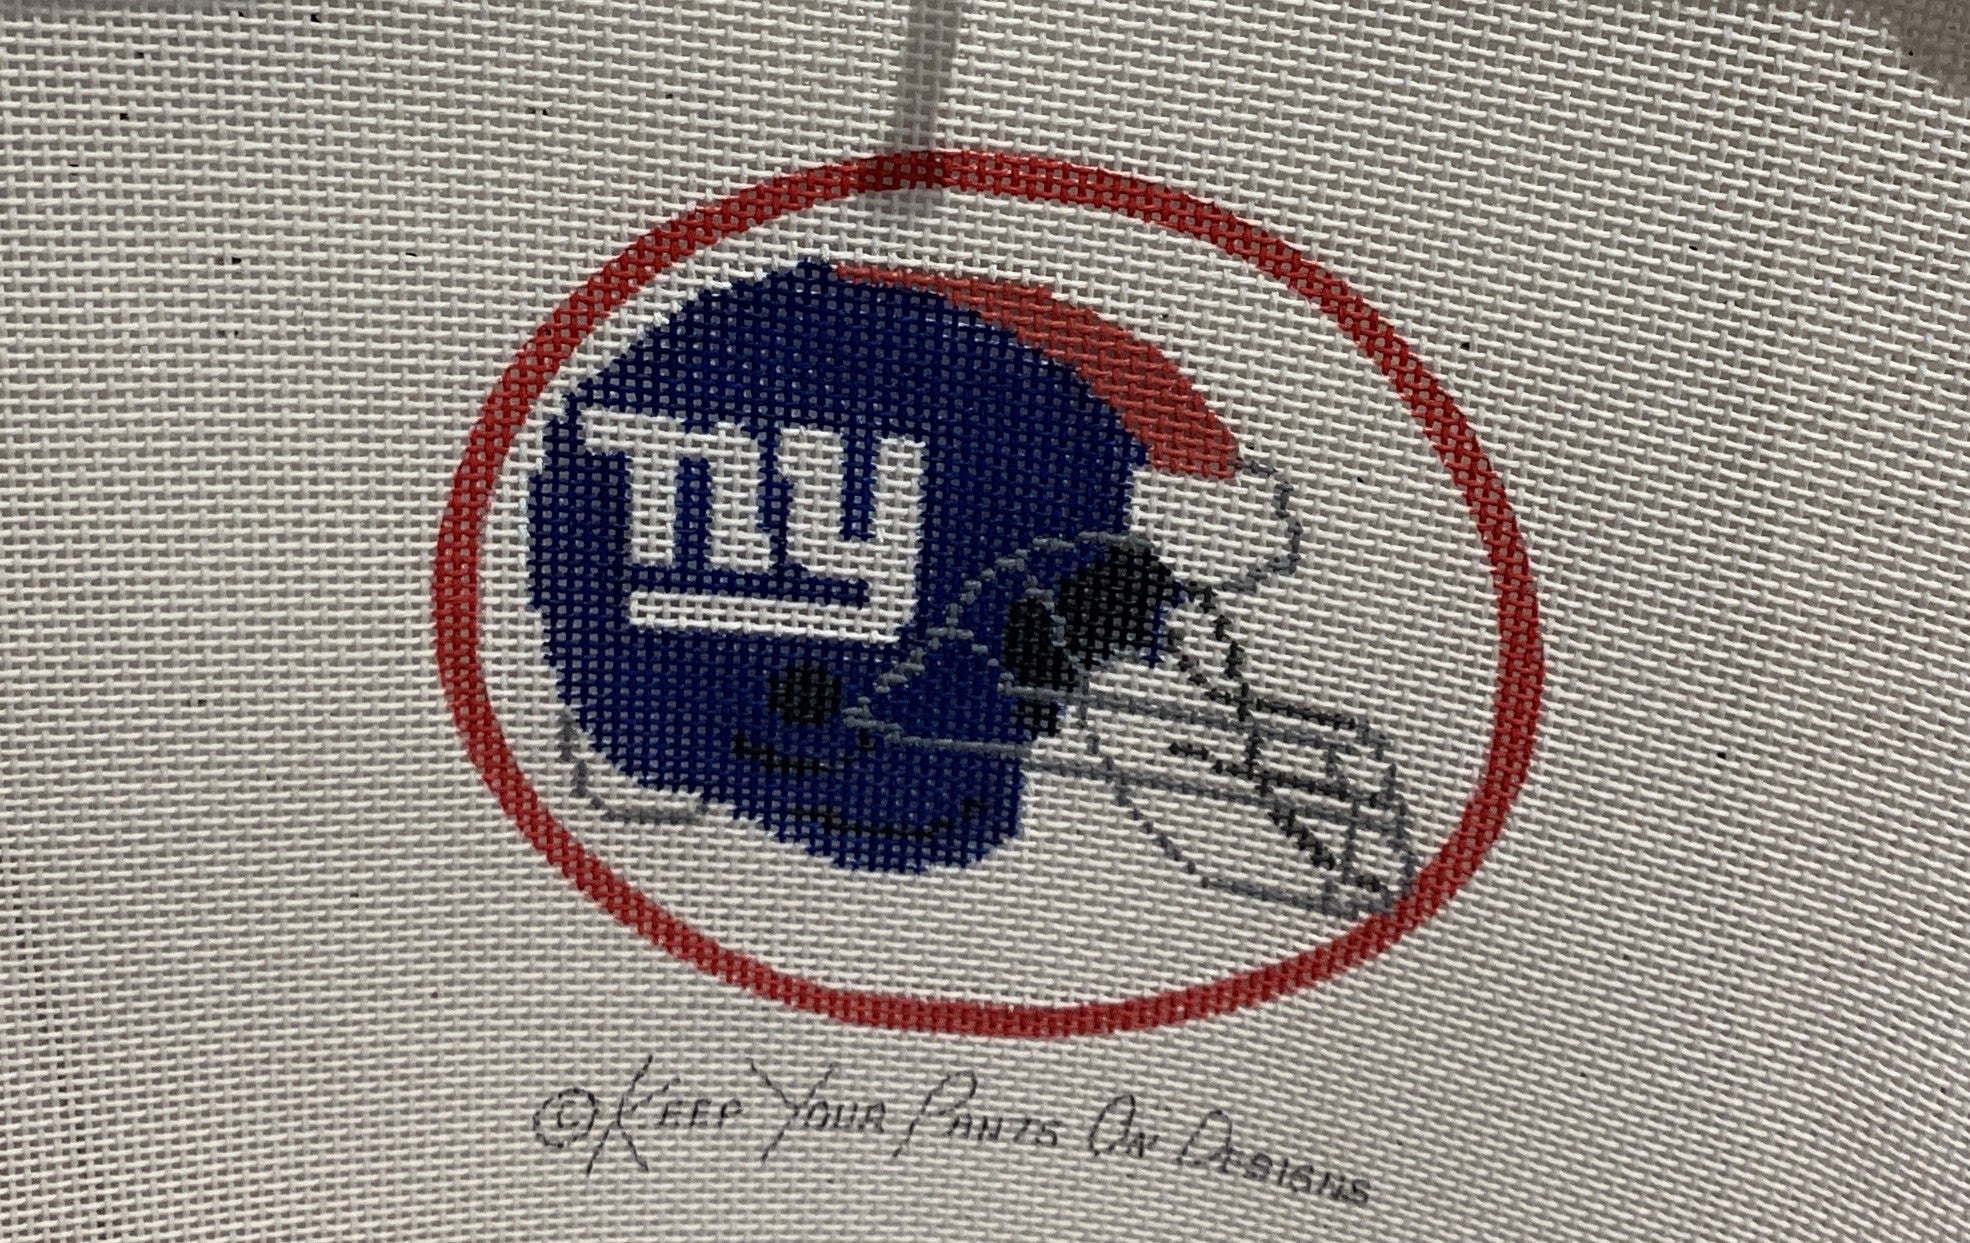 CBK 504 Keep Your Pants On NY Giants Round